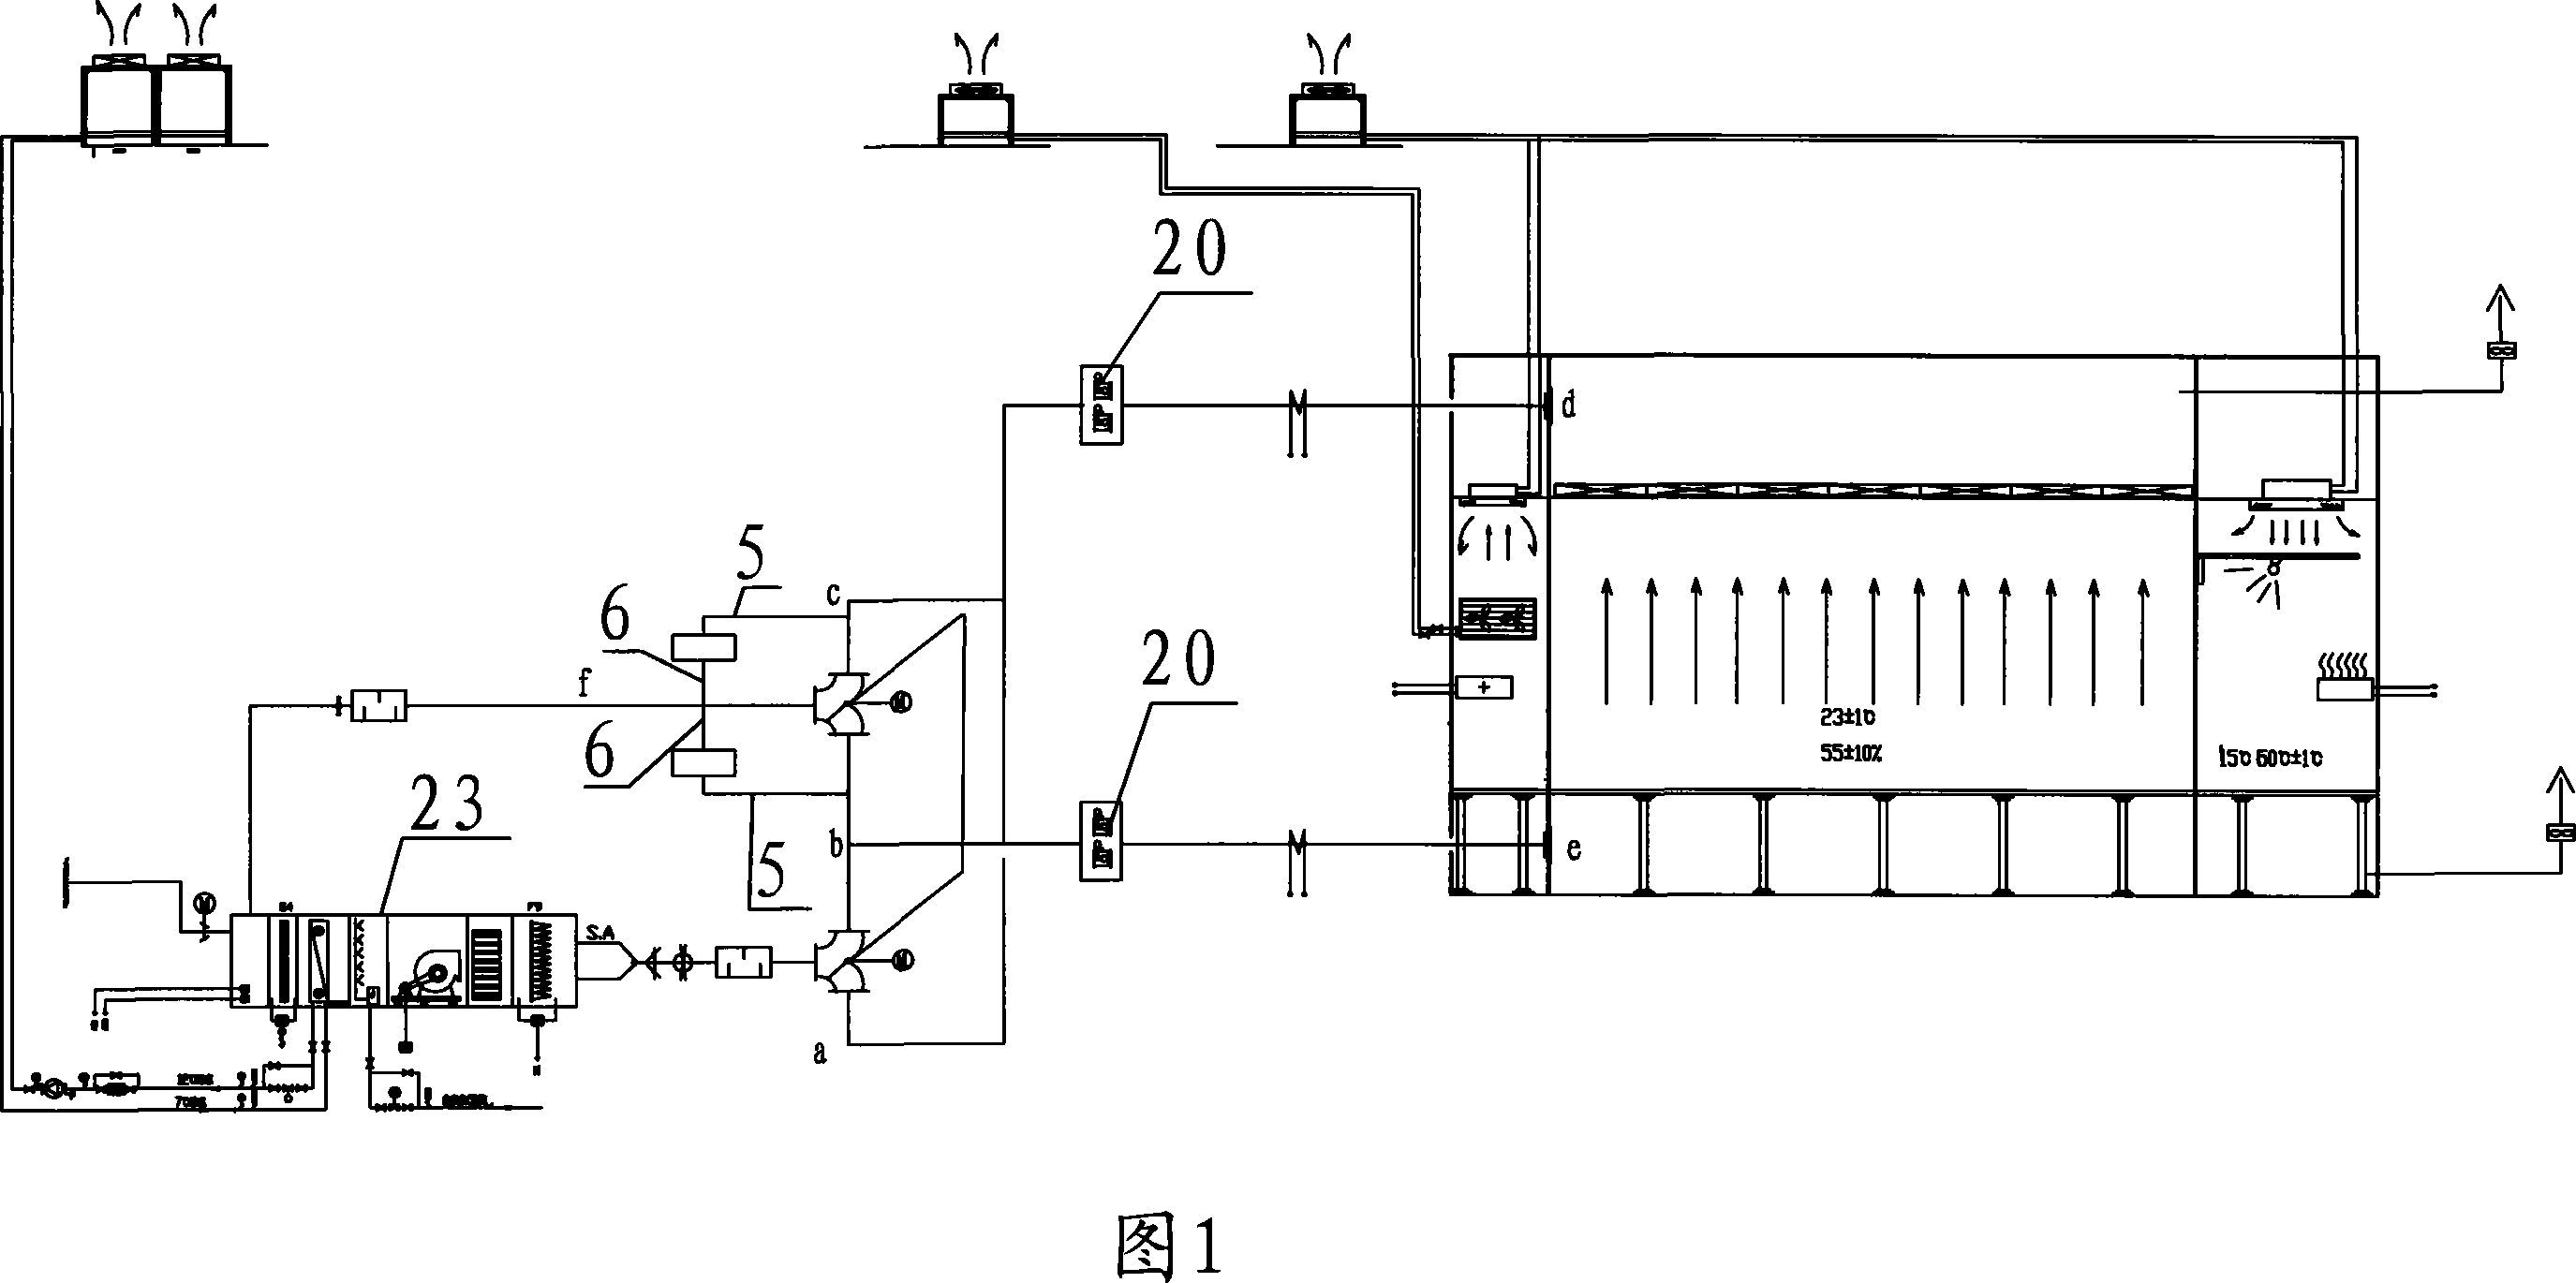 Fixed pressure by-pass valve device for air quantity control system